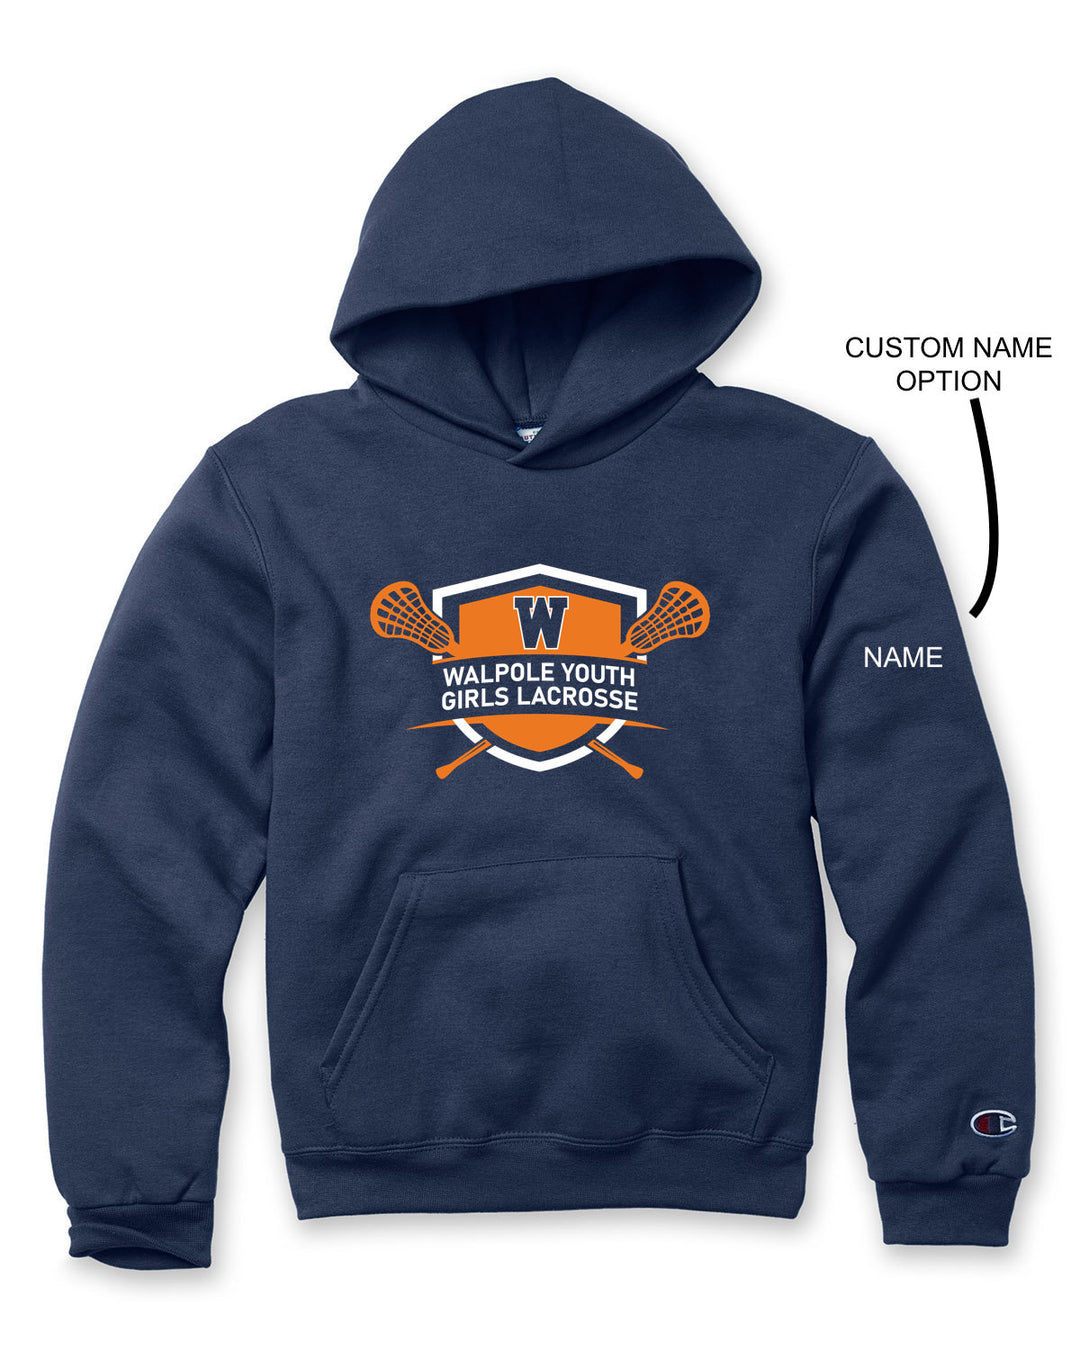 Walpole Youth Girls Lacrosse - Champion Youth Powerblend® Pullover Hooded Sweatshirt (S790)